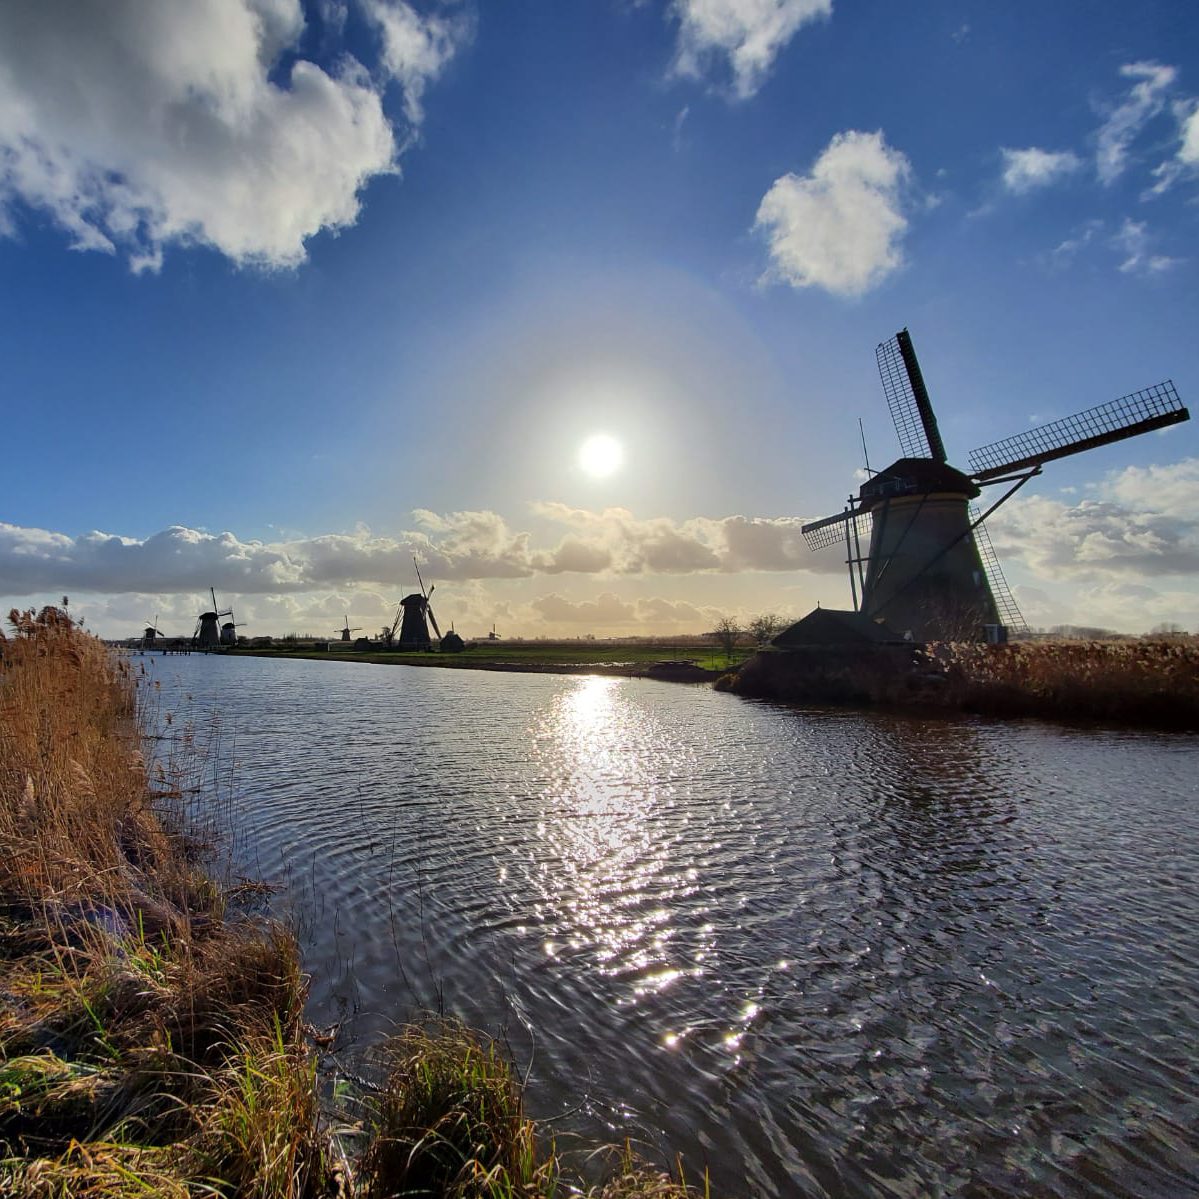 Dutch People Are the Coldest M-F**Kers, and 10 Other Things I Hate About the Netherlands